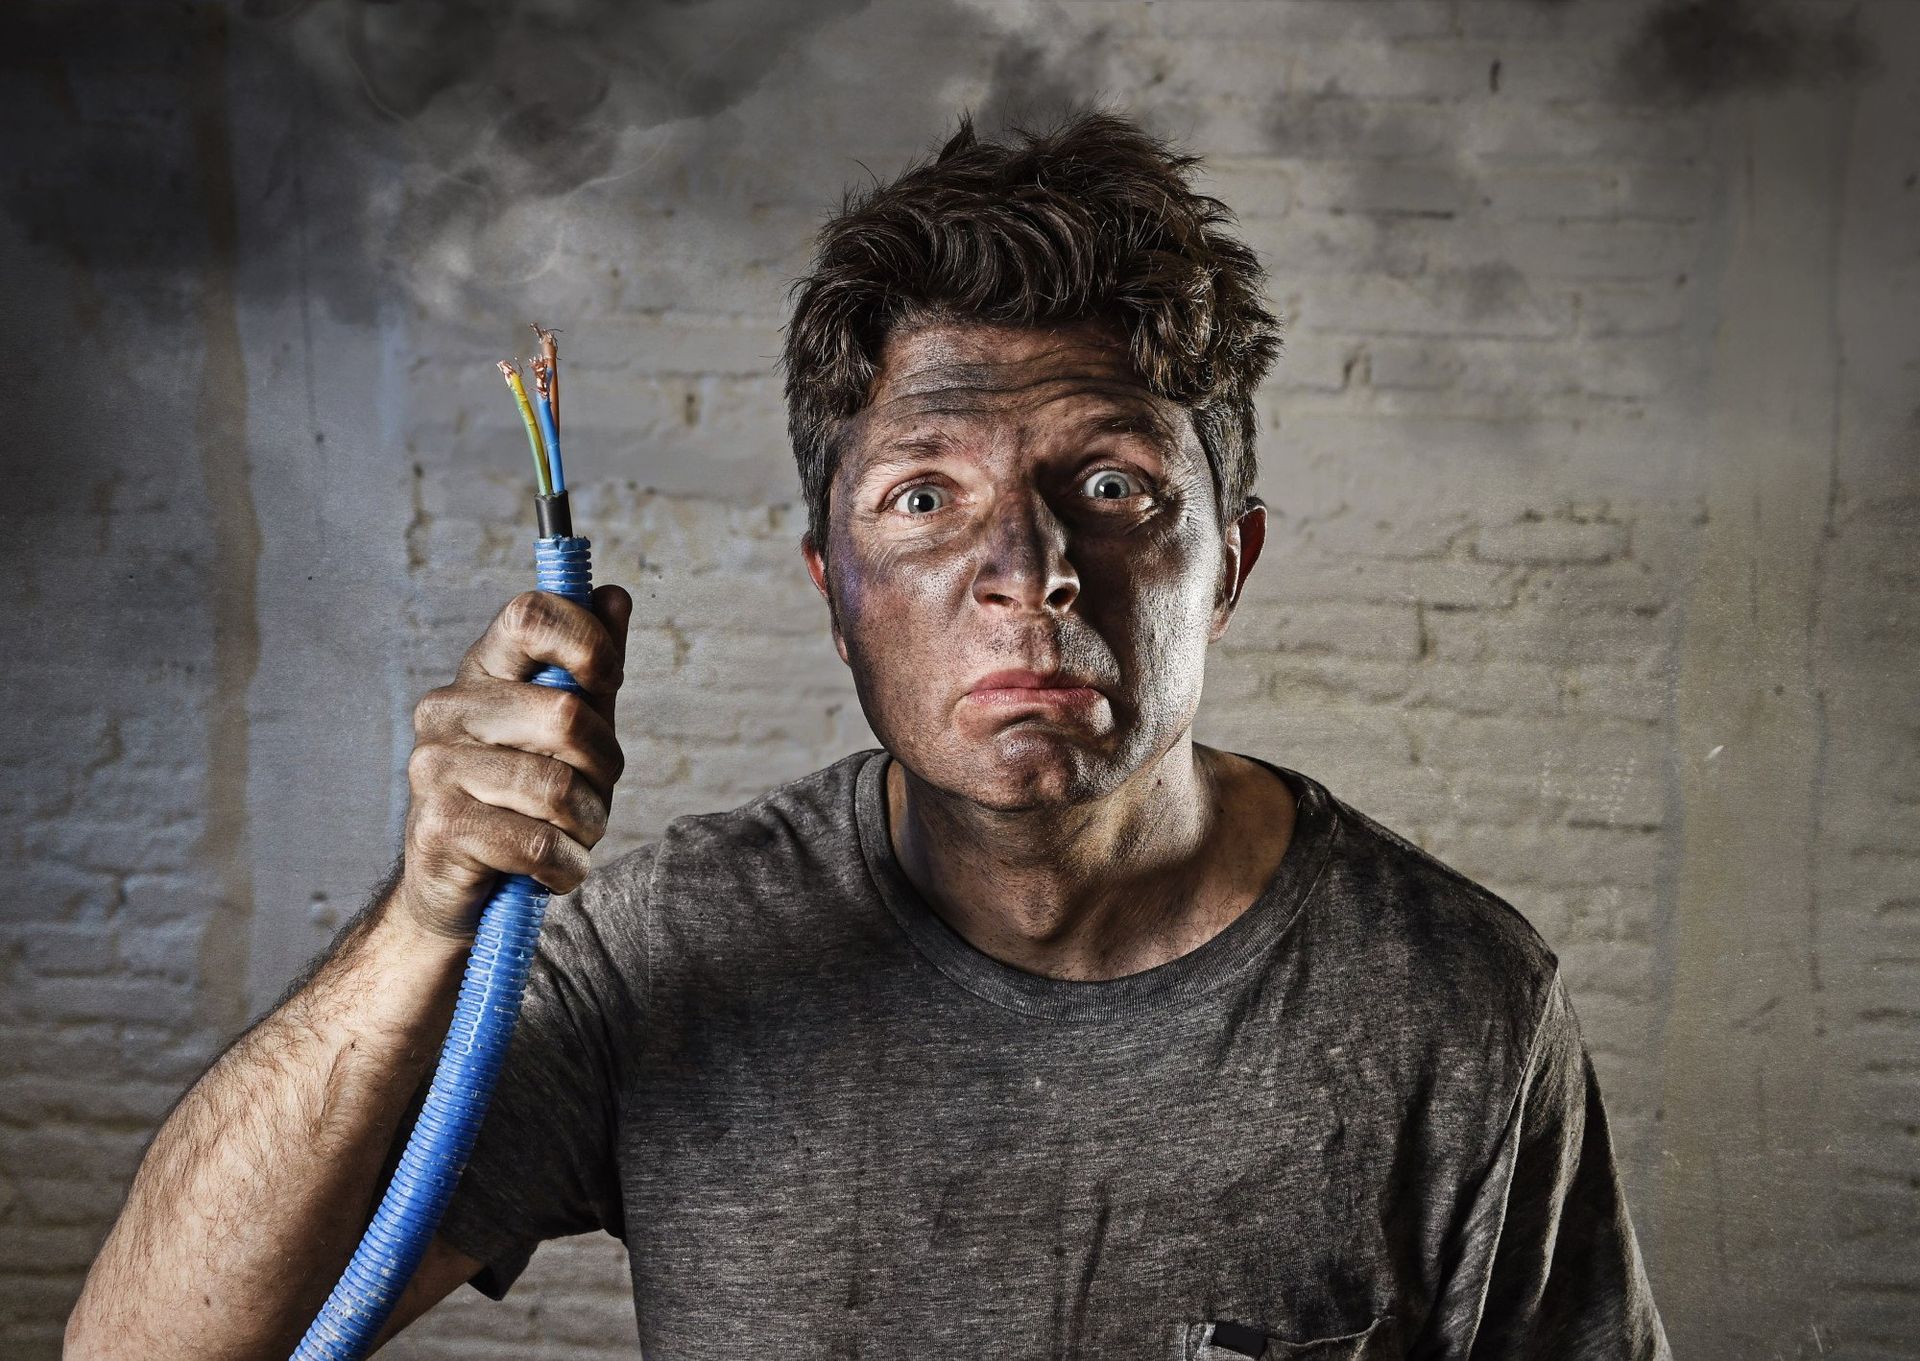 man covered in soot with smoking hair holding a cord with exposed wires